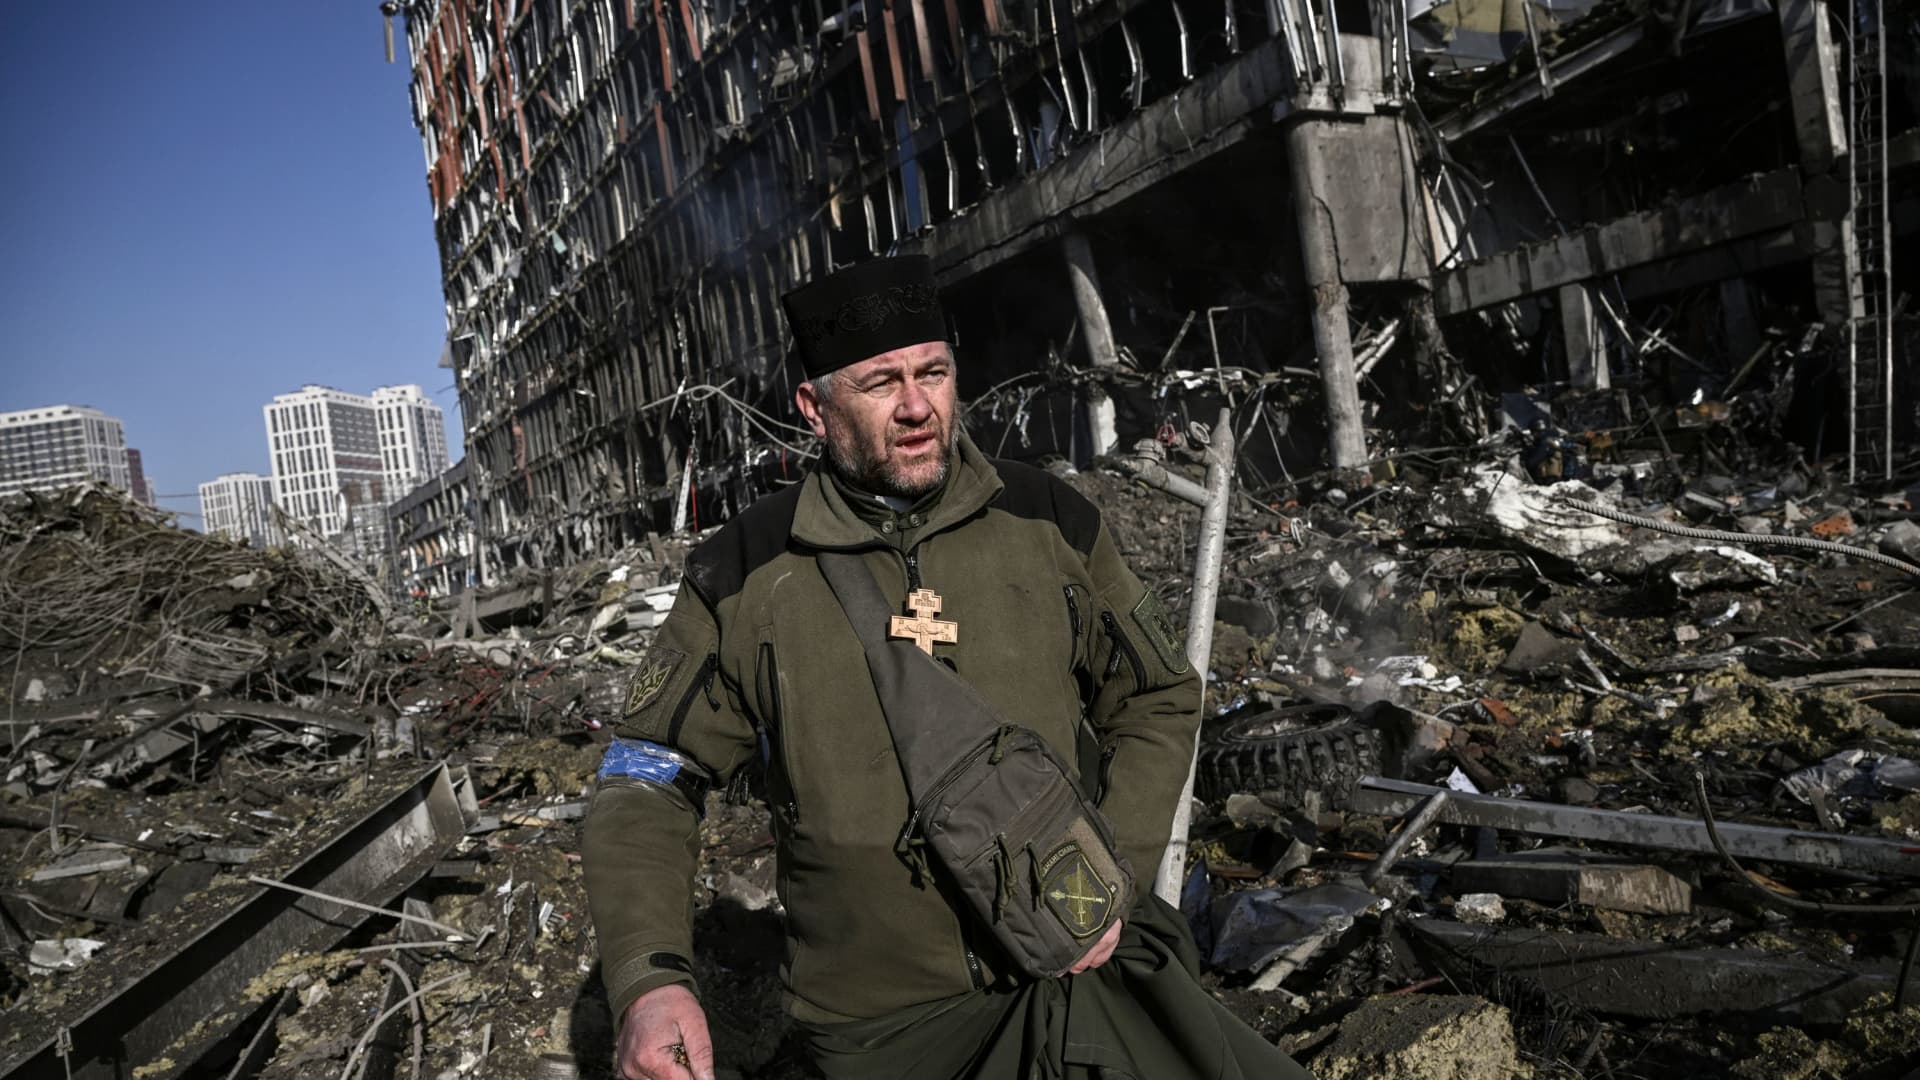 Ukraine army Chaplain Mikola Madenski walks through debris outside the destroyed Retroville shopping mall in a residential district, after a Russian attack on the Ukranian capital Kyiv on March 21, 2022.